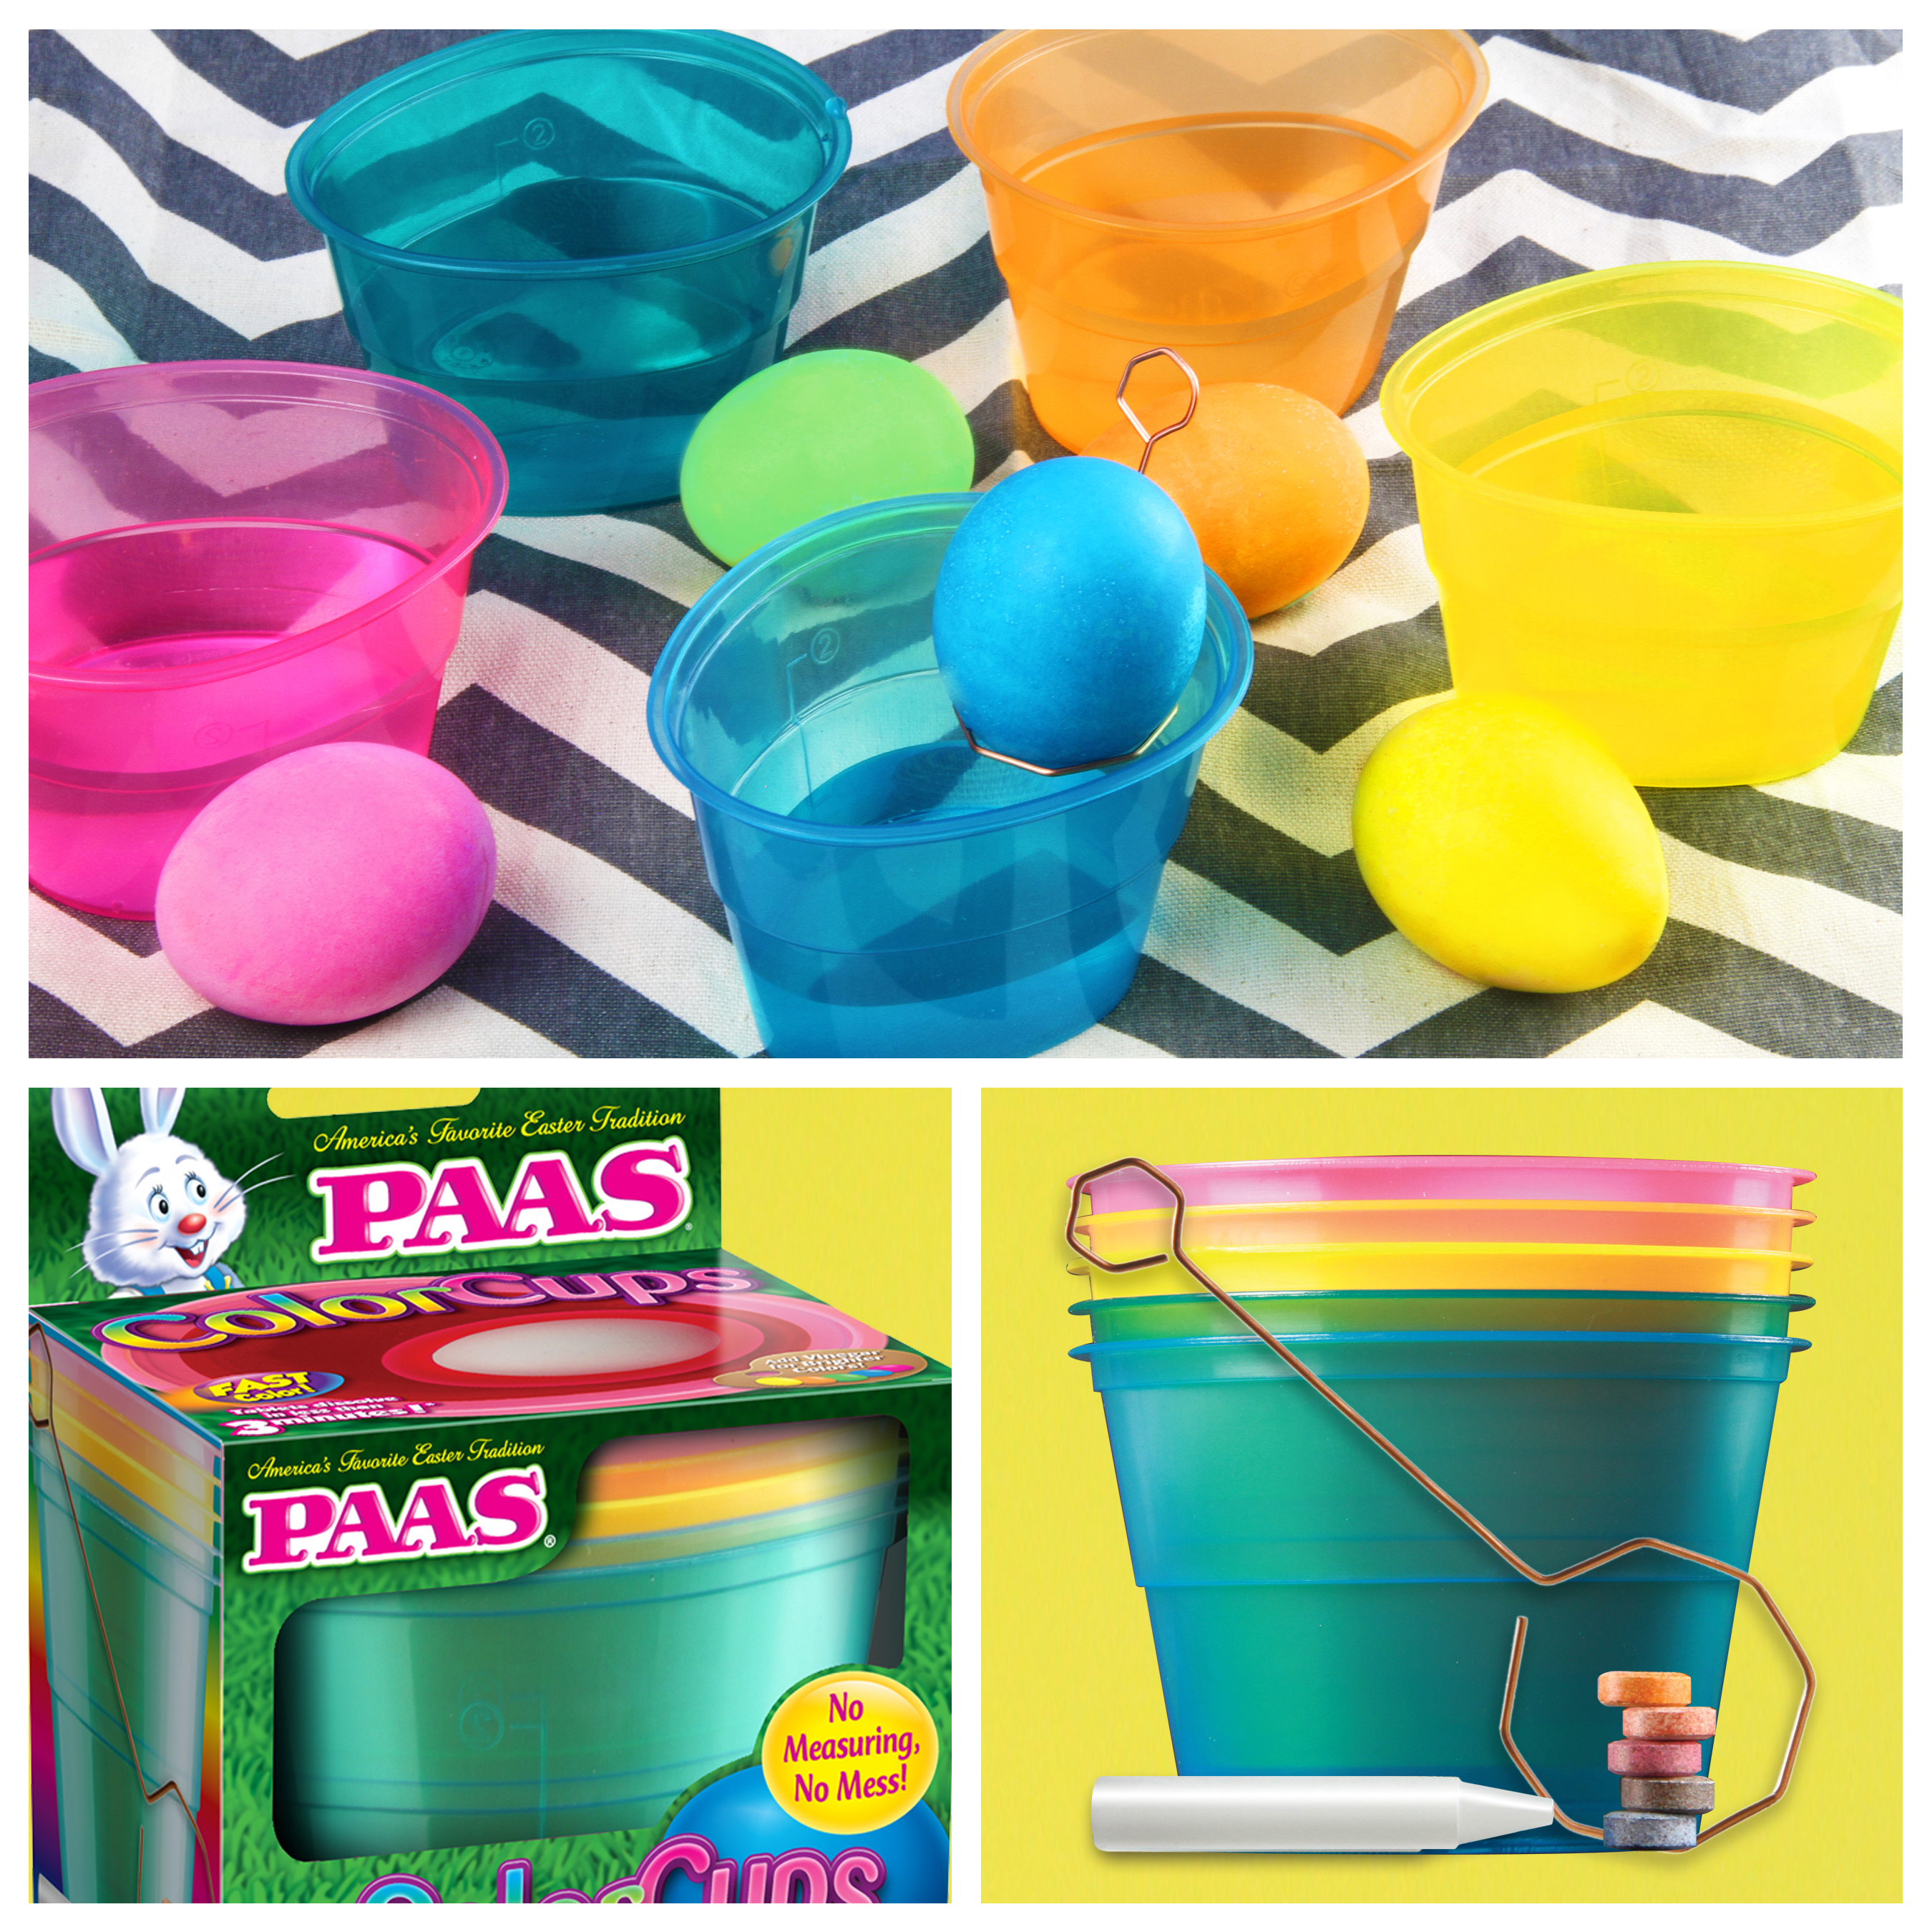 PAAS® Color Cups for easy Easter egg dyeing. | PAAS Egg Decorating ...